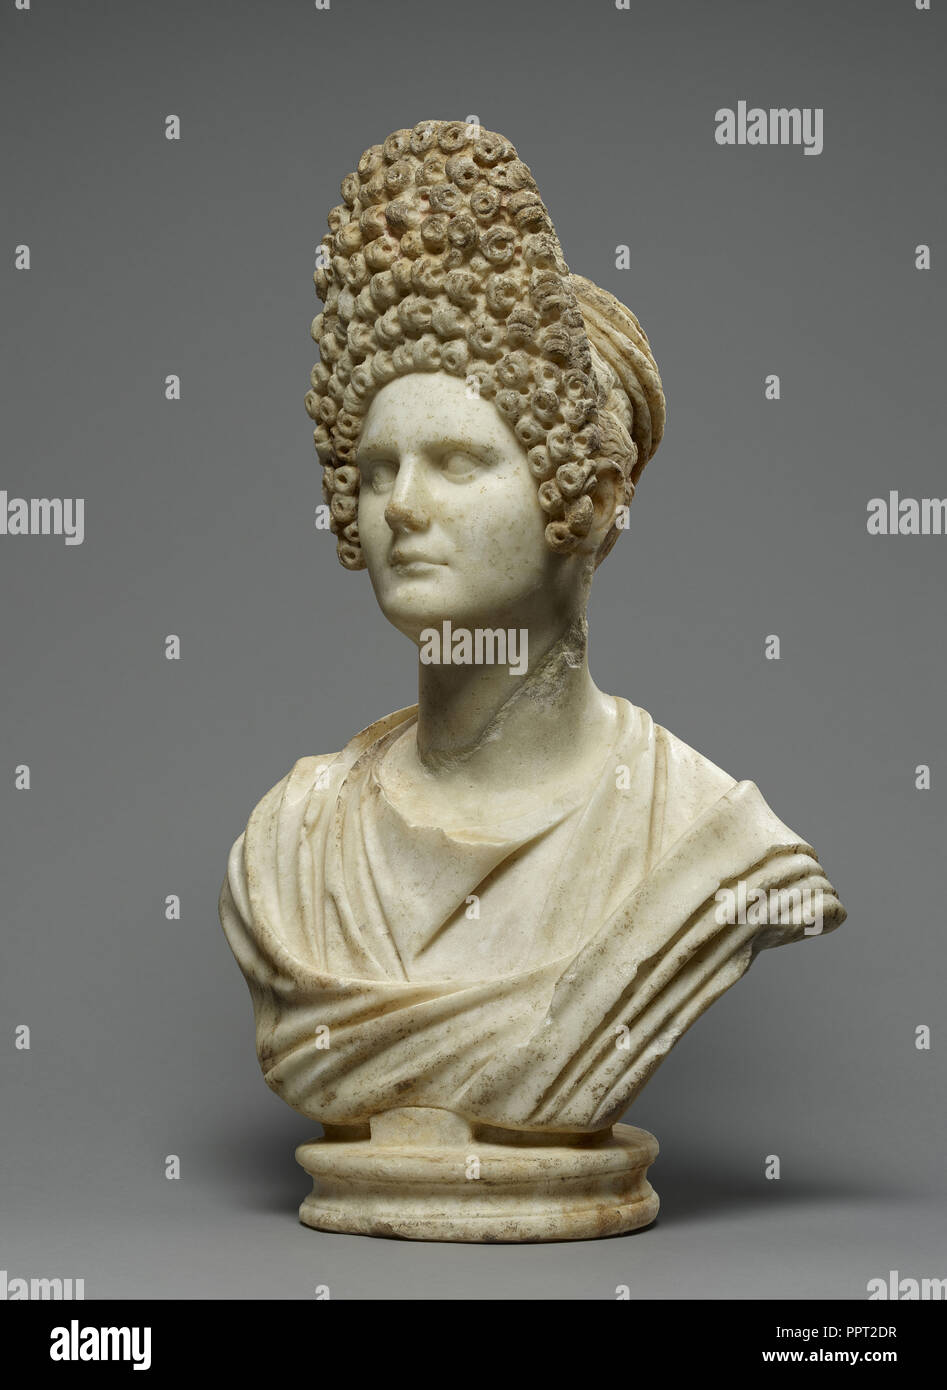 https://c8.alamy.com/comp/PPT2DR/bust-of-a-flavian-woman-roman-empire-late-1st-century-italian-marble-68-41-22-cm-26-34-16-18-8-1116-in-PPT2DR.jpg